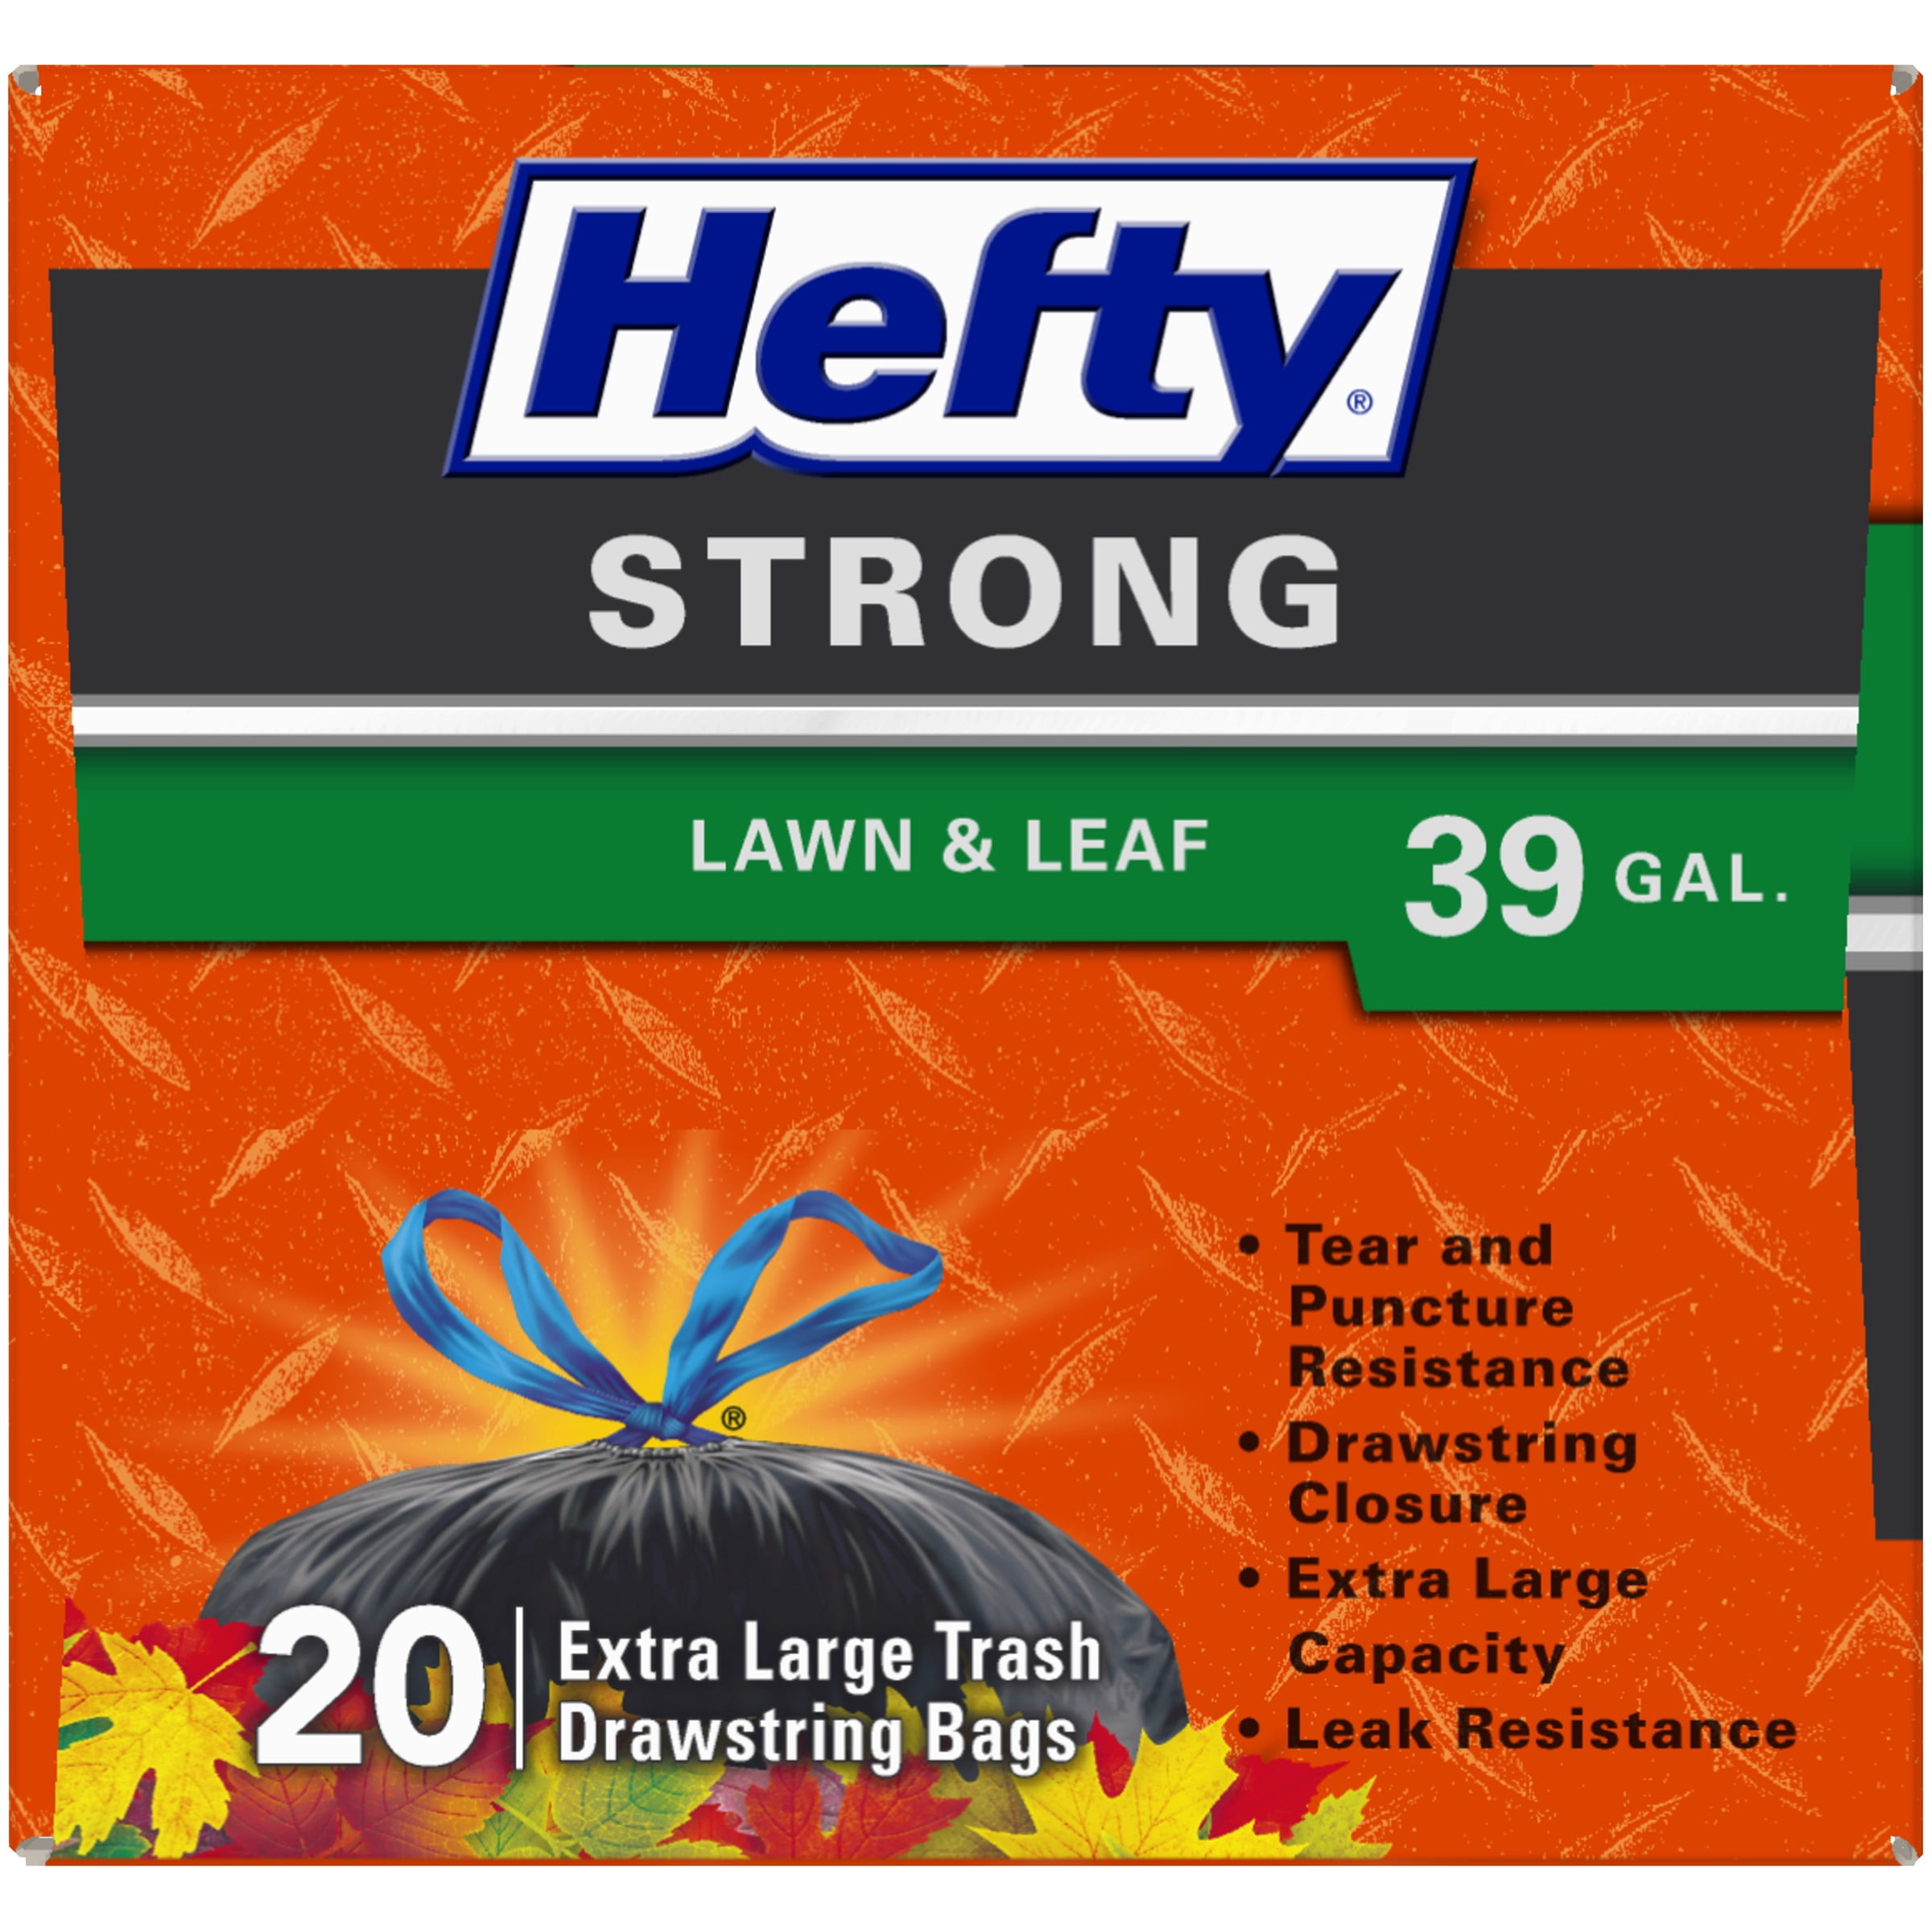 Hefty Extra Strong Extra Large Trash Bags 3 Lawn and Leaf, Drawstring, 39 Gallon Bags, 38 Count 